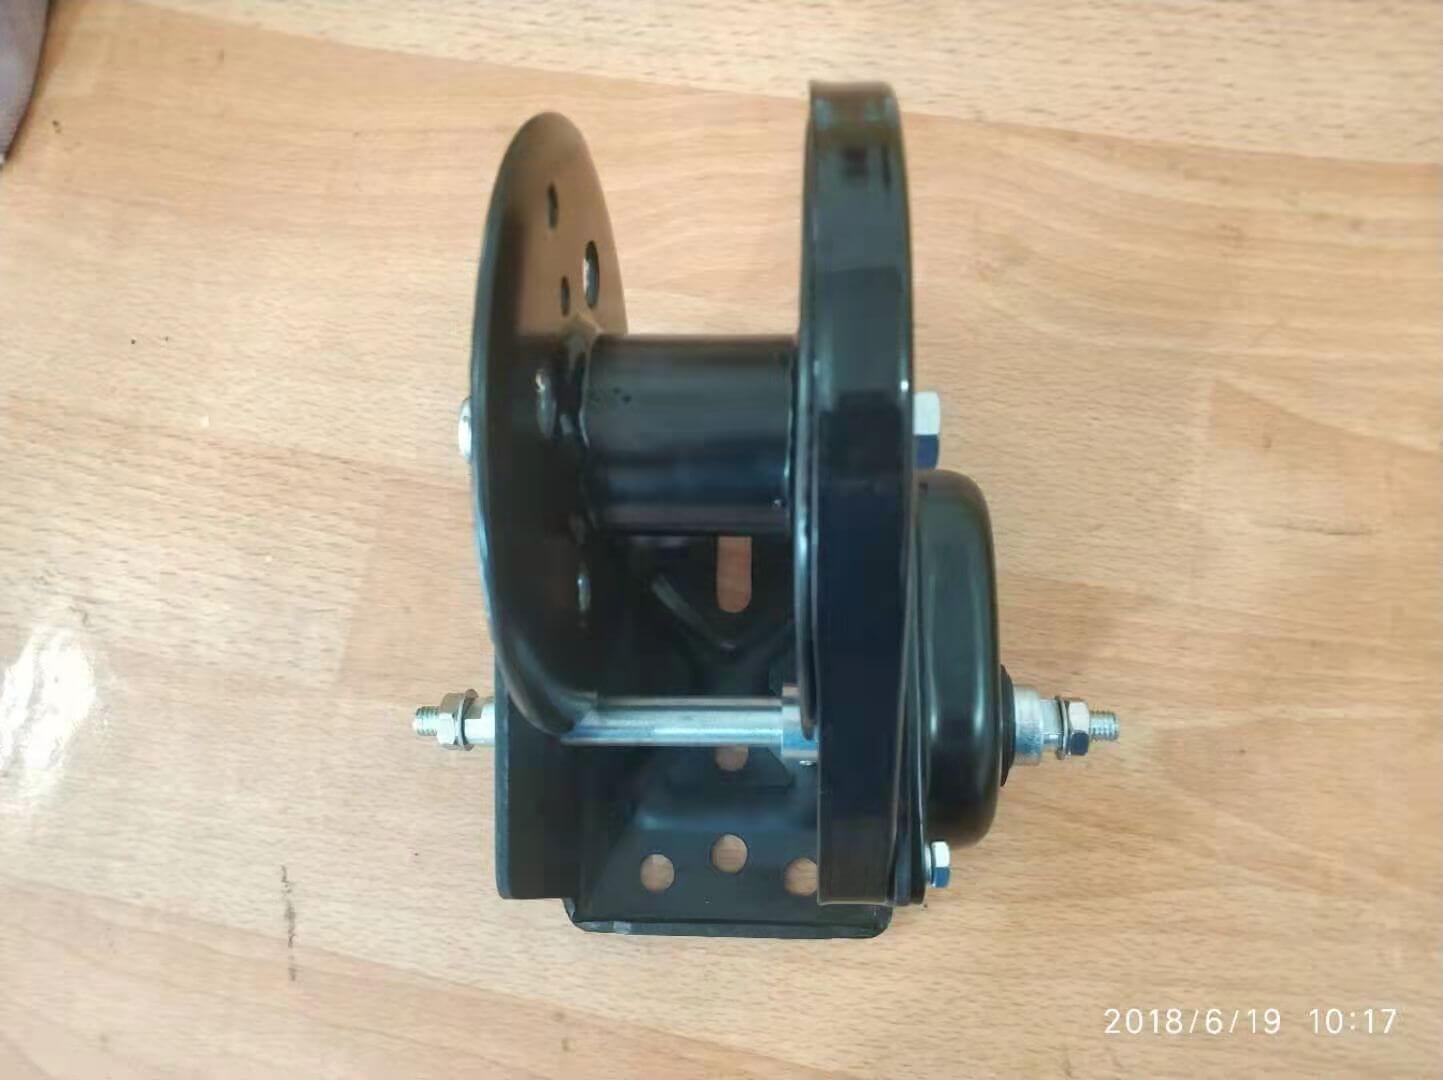 double handle manual winch made in china by RAMHOIST-4.jpg